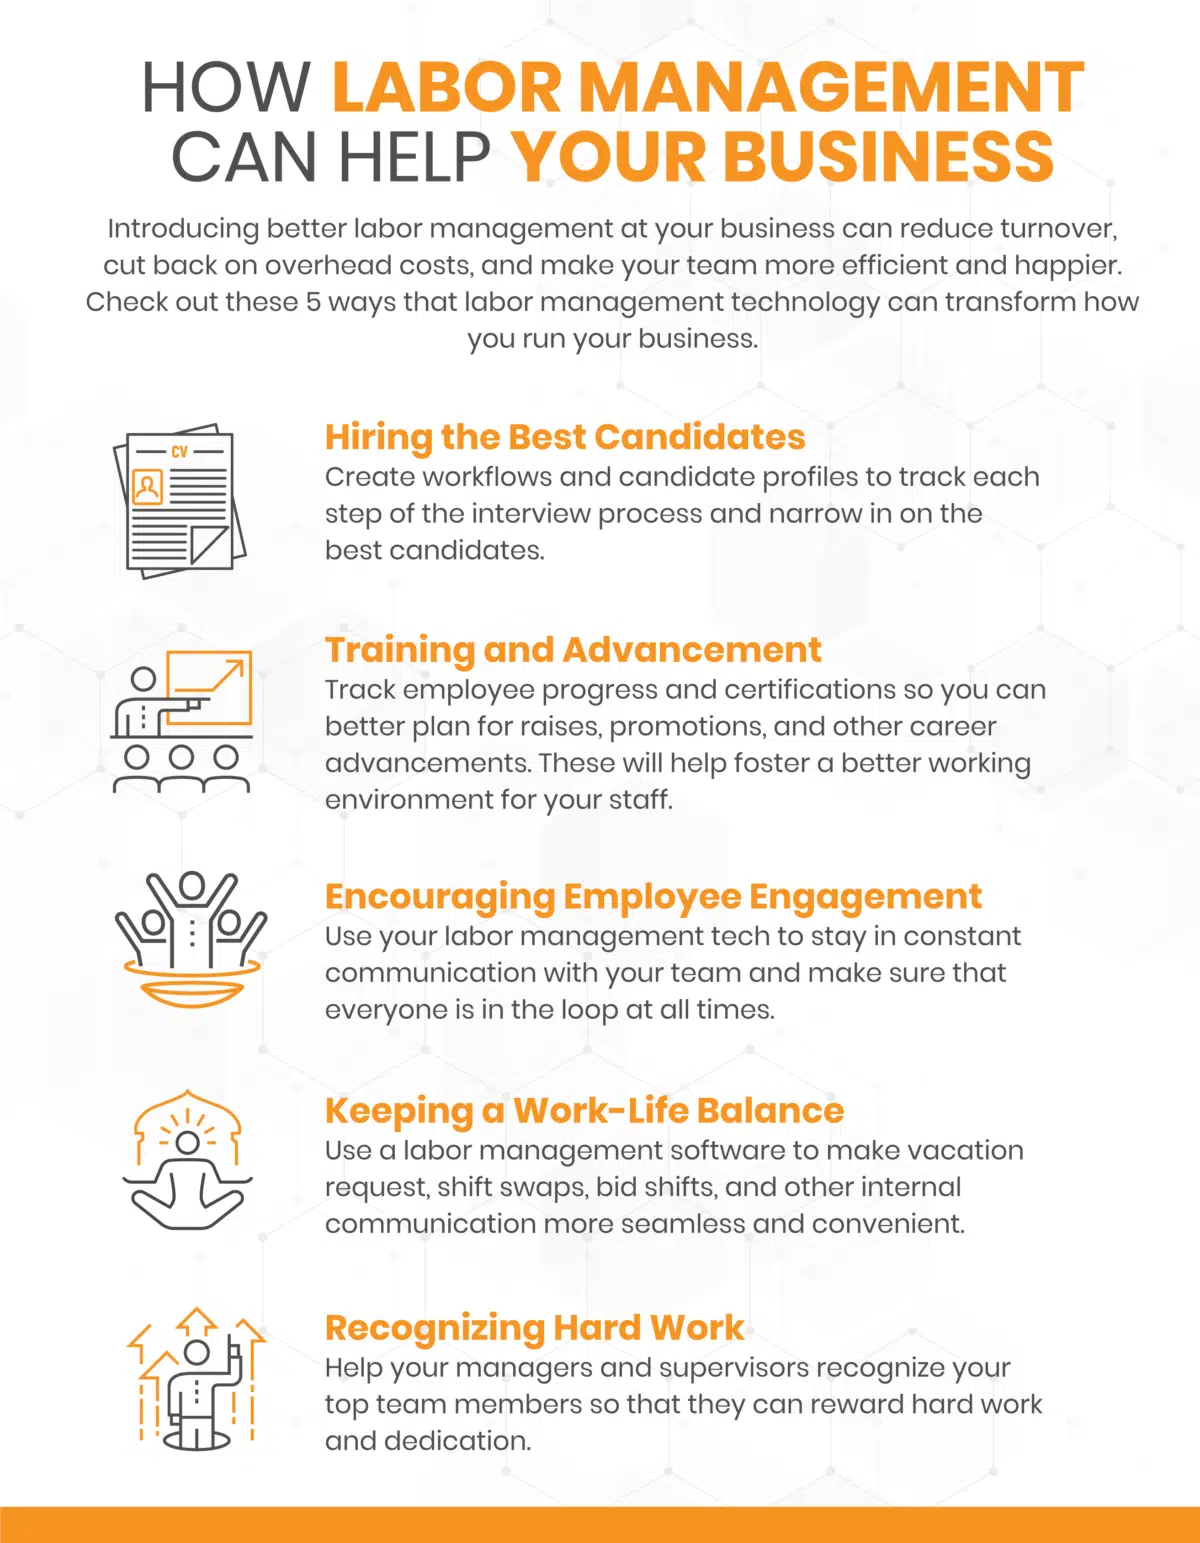 an infographic on how labor management can help your business